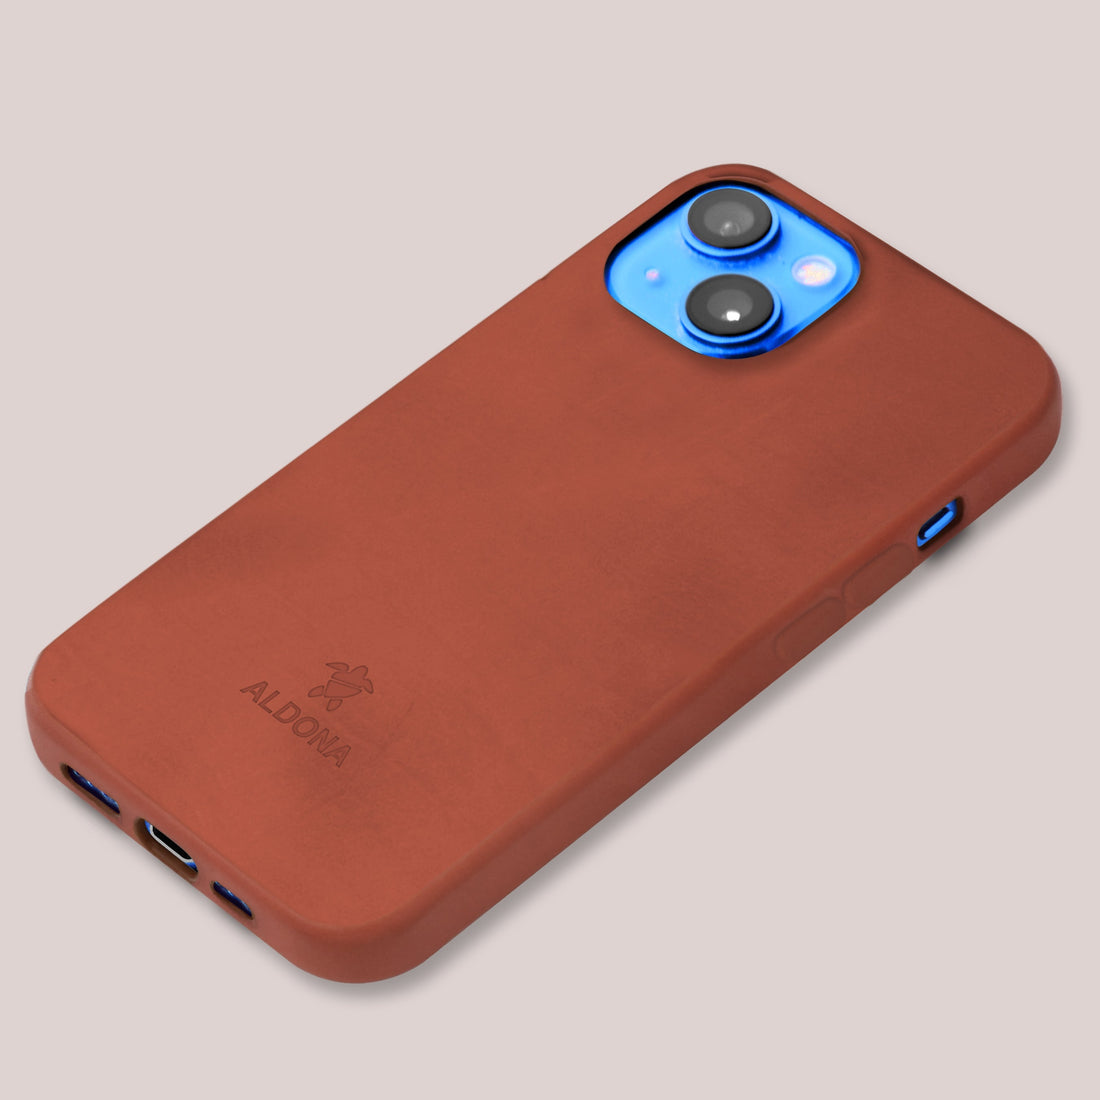 Kalon Case for iPhone 13 Pro with MagSafe Compatibility - Vintage Tan